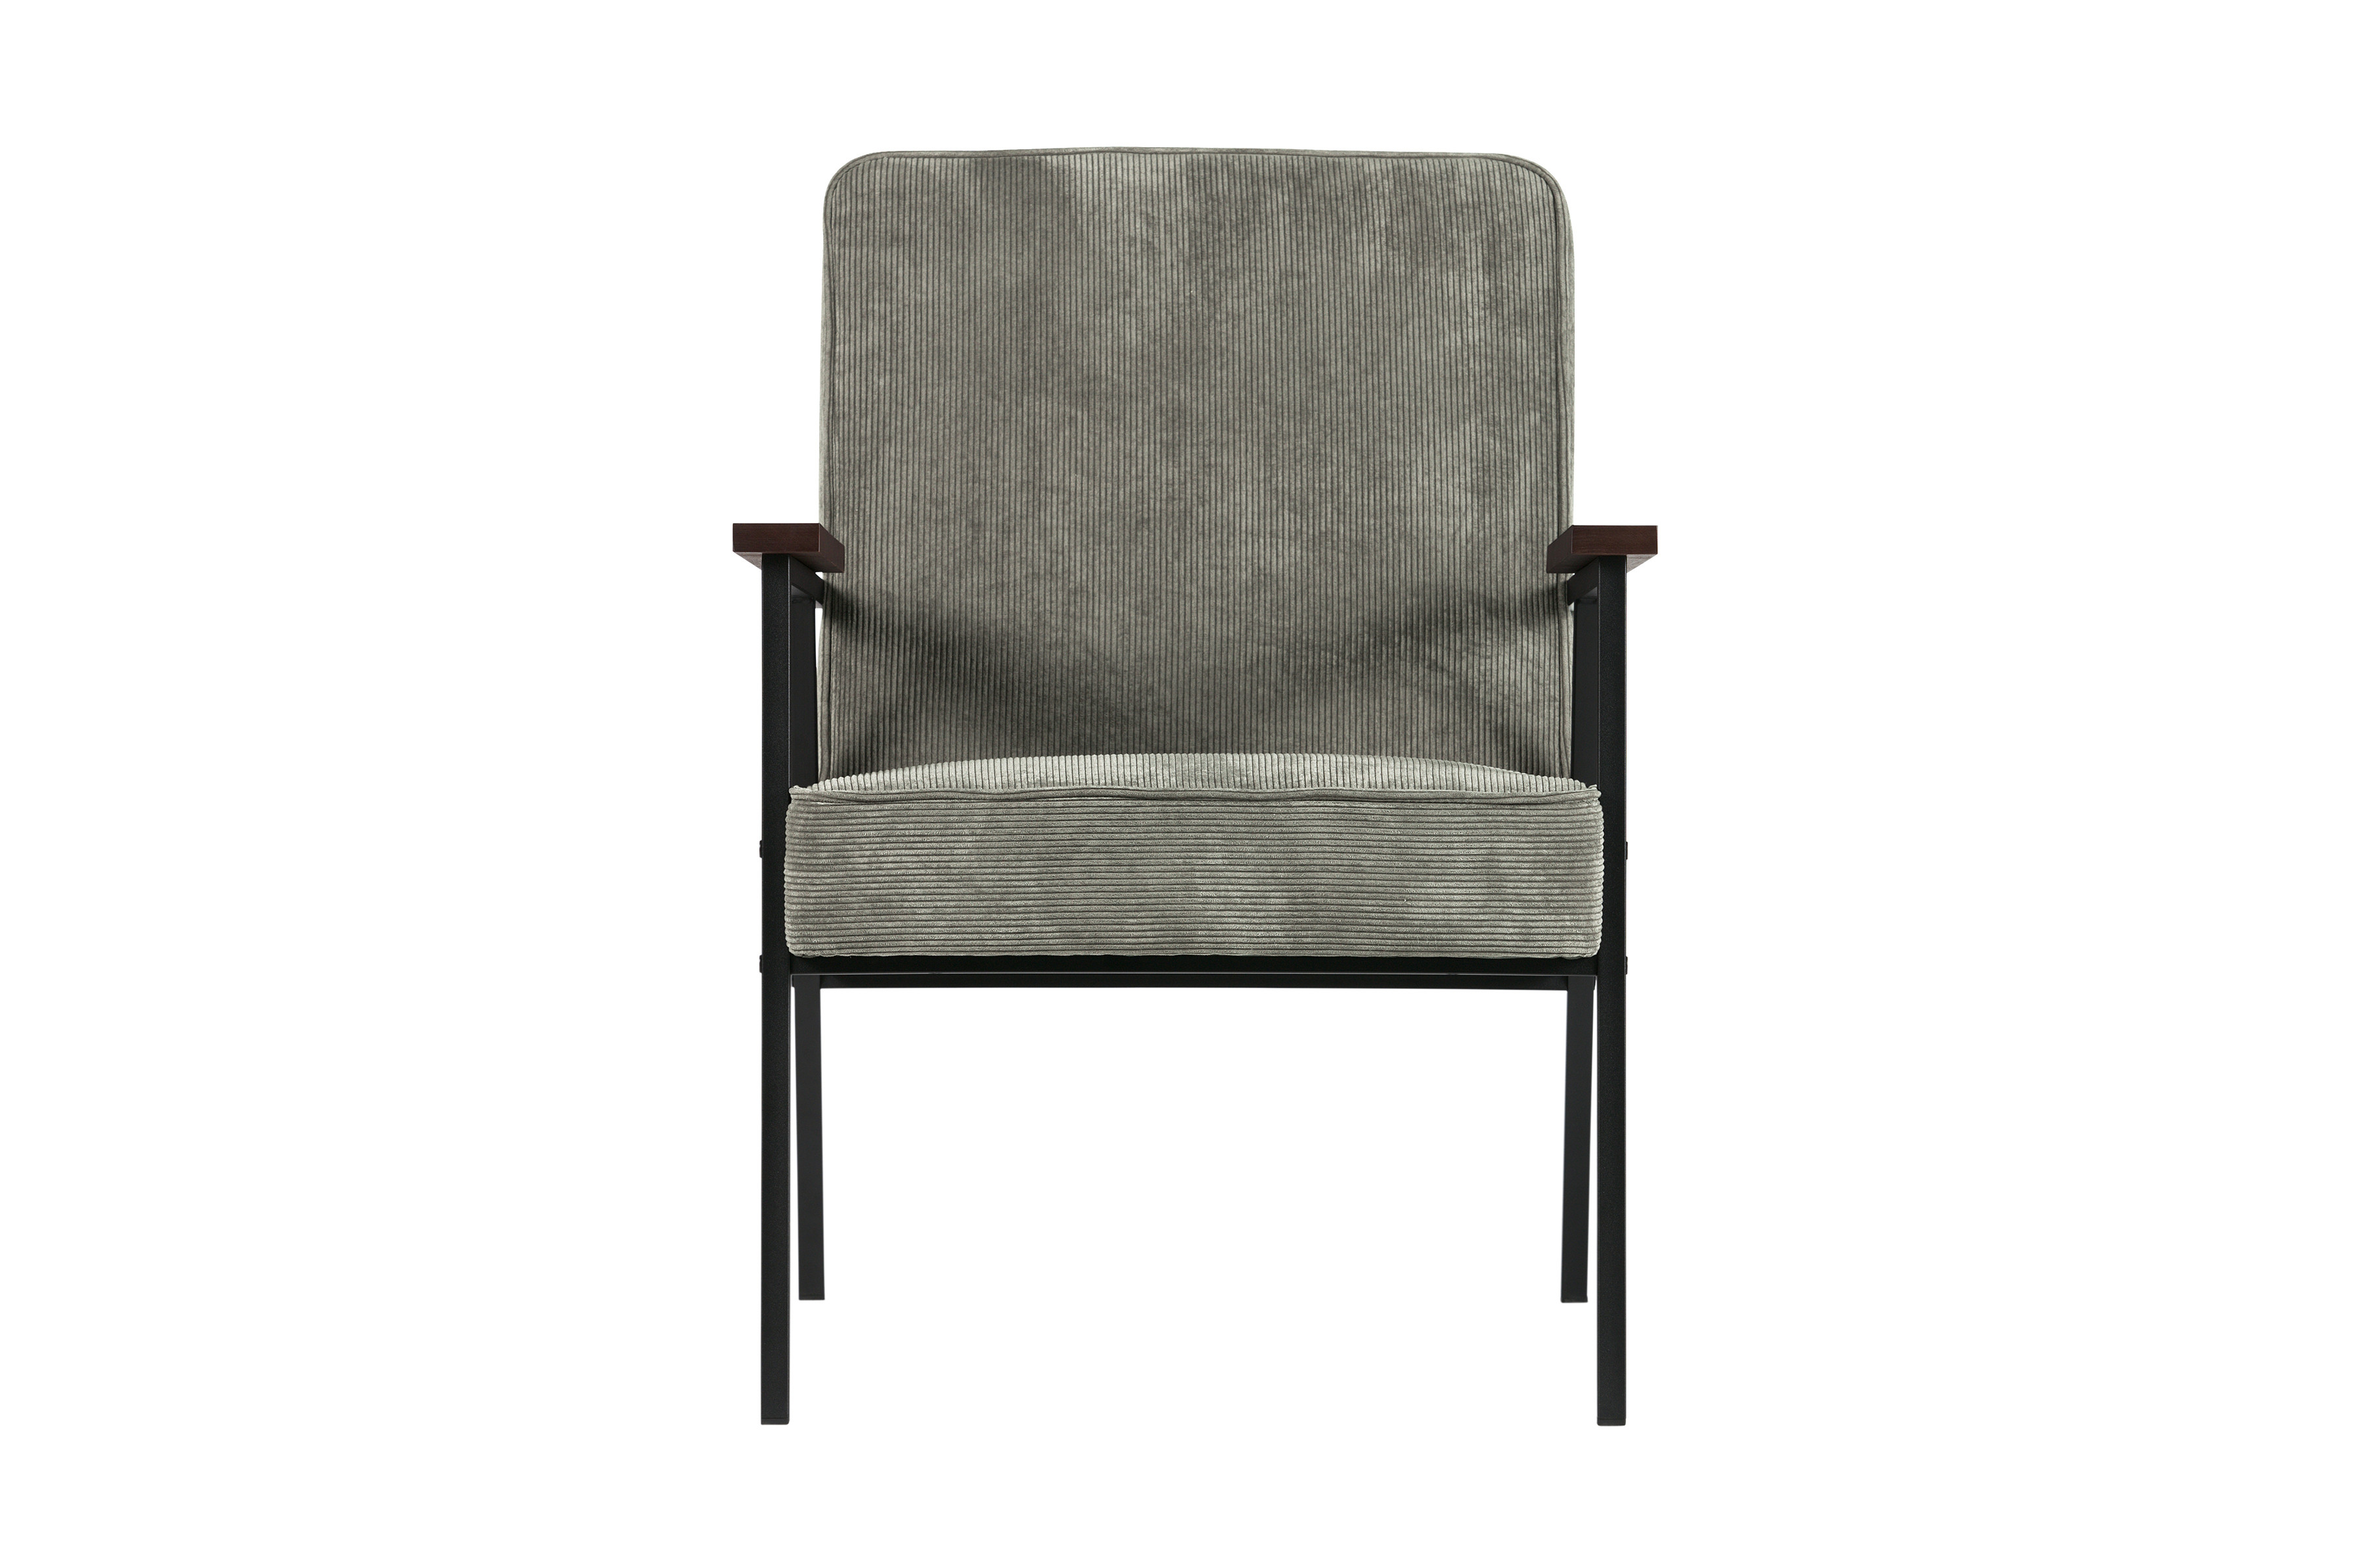 Rent a Armchair Sally weathered green? Rent at KeyPro furniture rental!